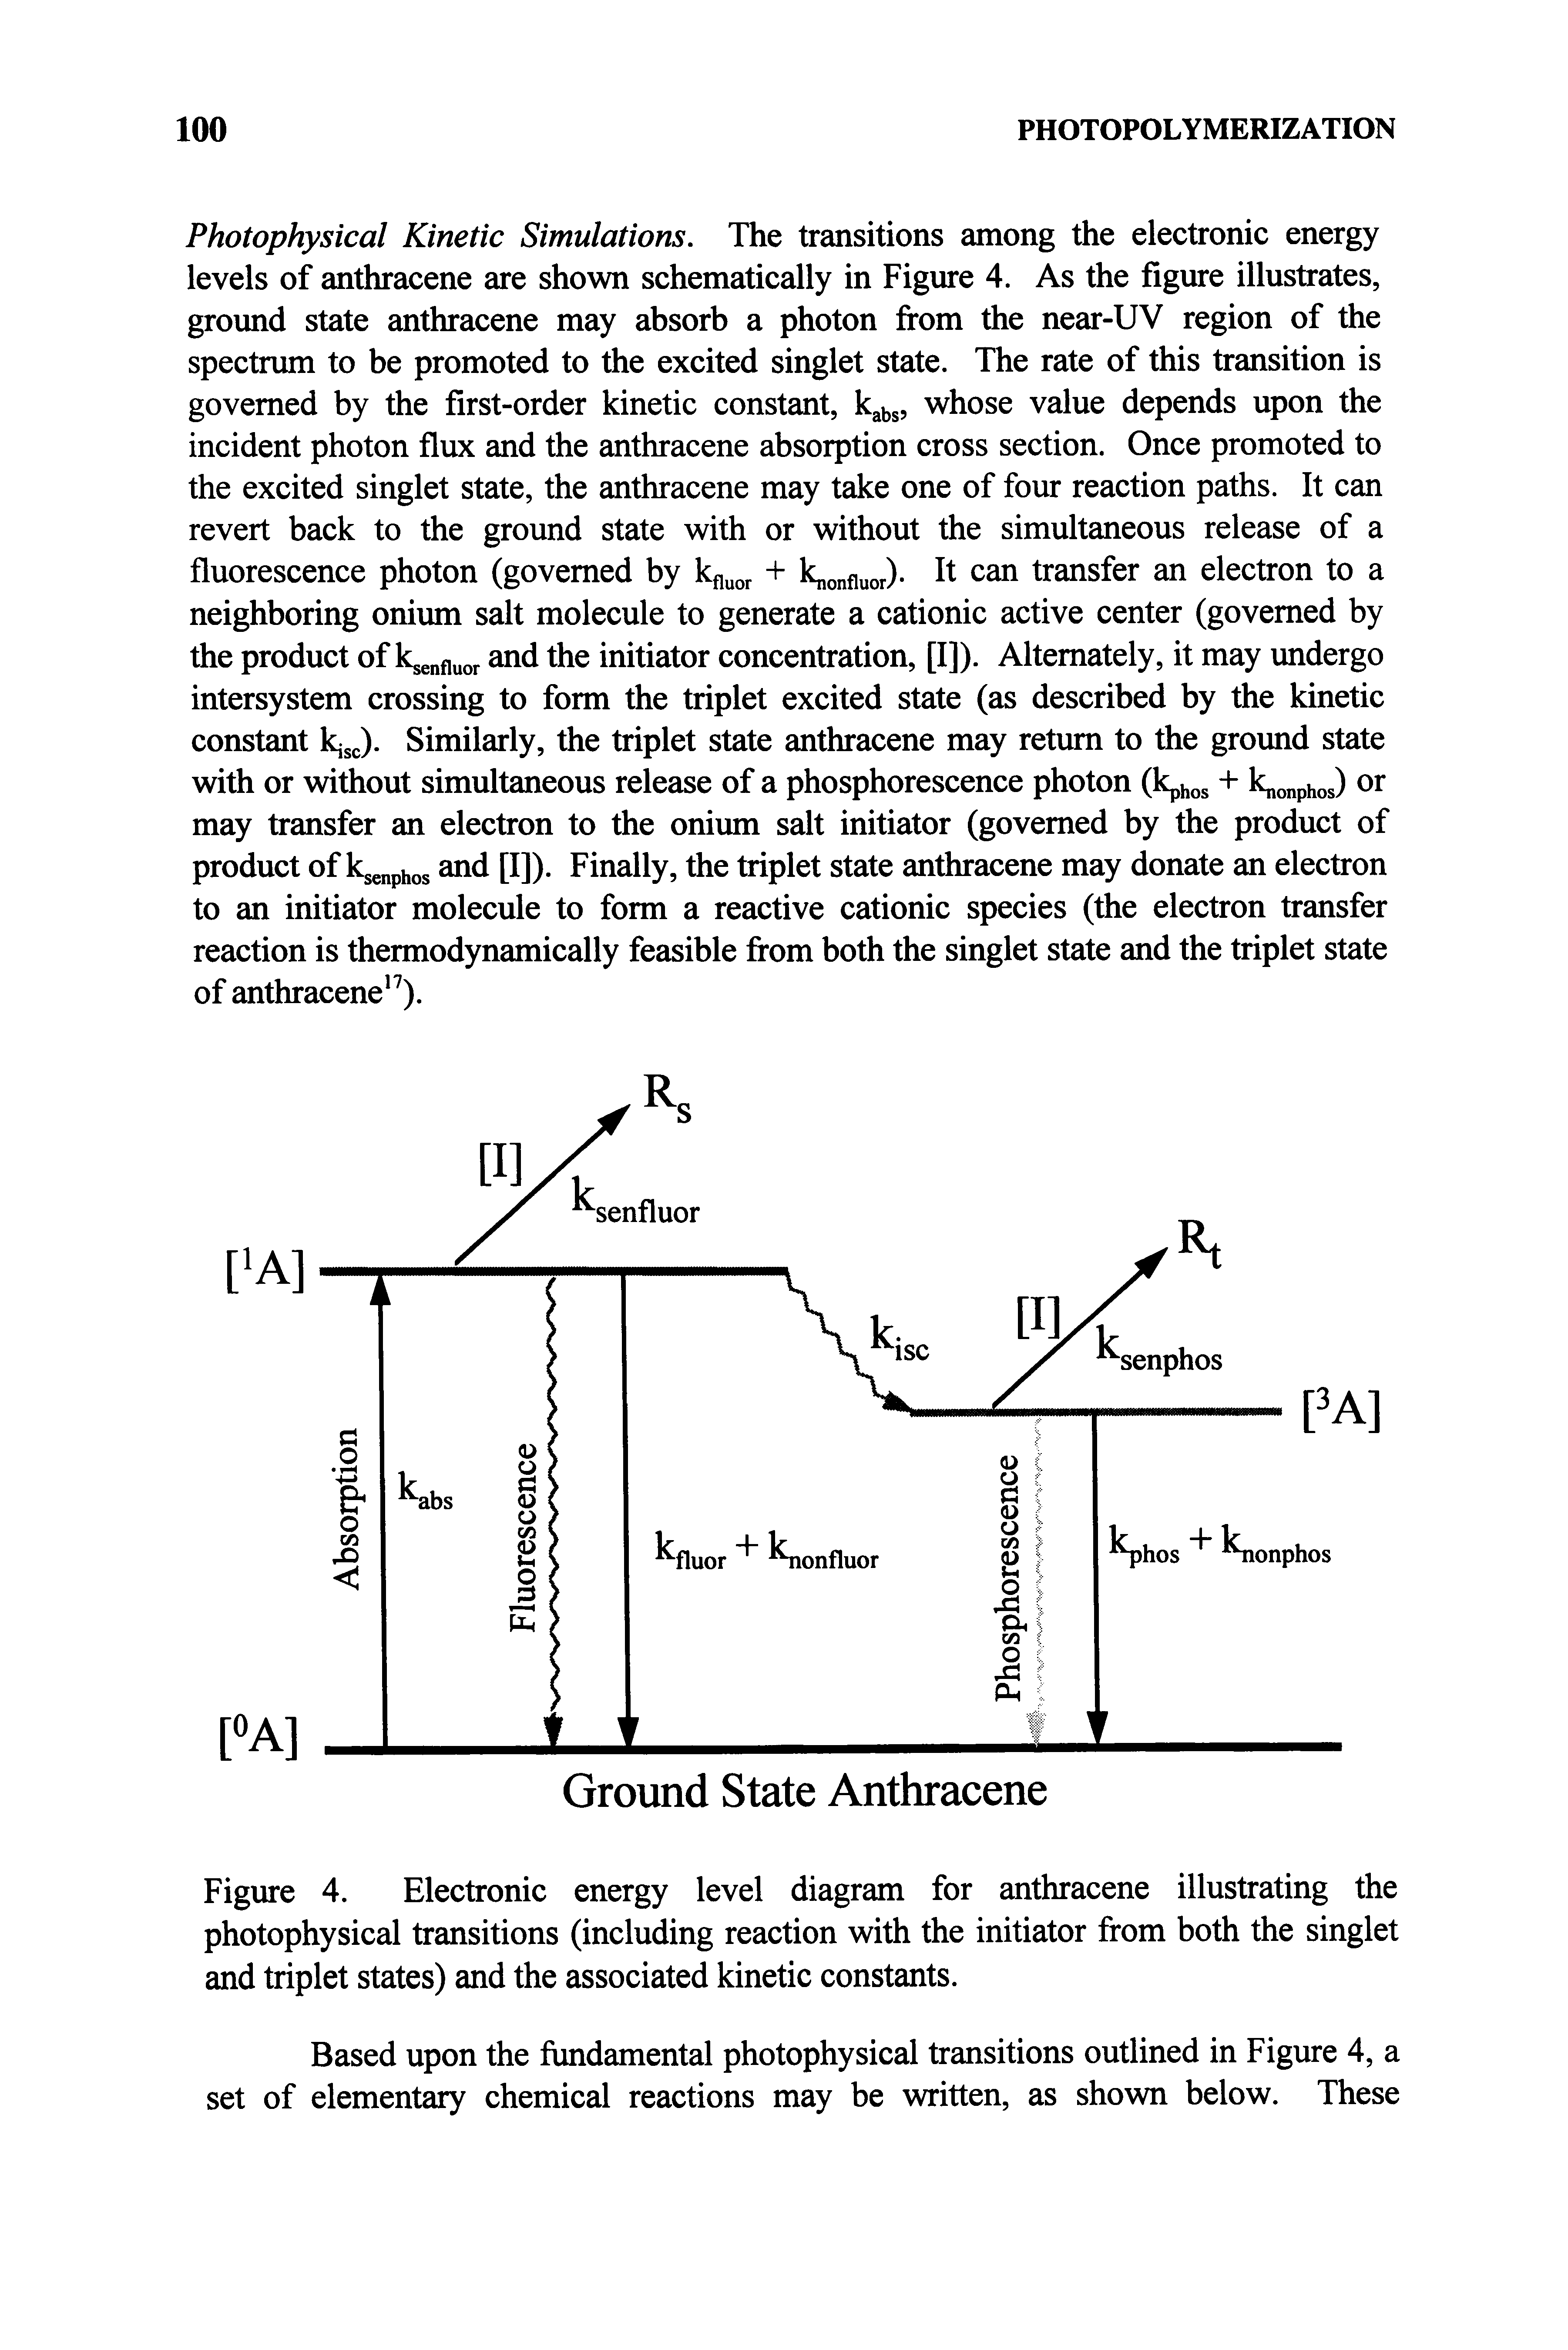 Figure 4. Electronic energy level diagram for anthracene illustrating the photophysical transitions (including reaction with the initiator from both the singlet and triplet states) and the associated kinetic constants.